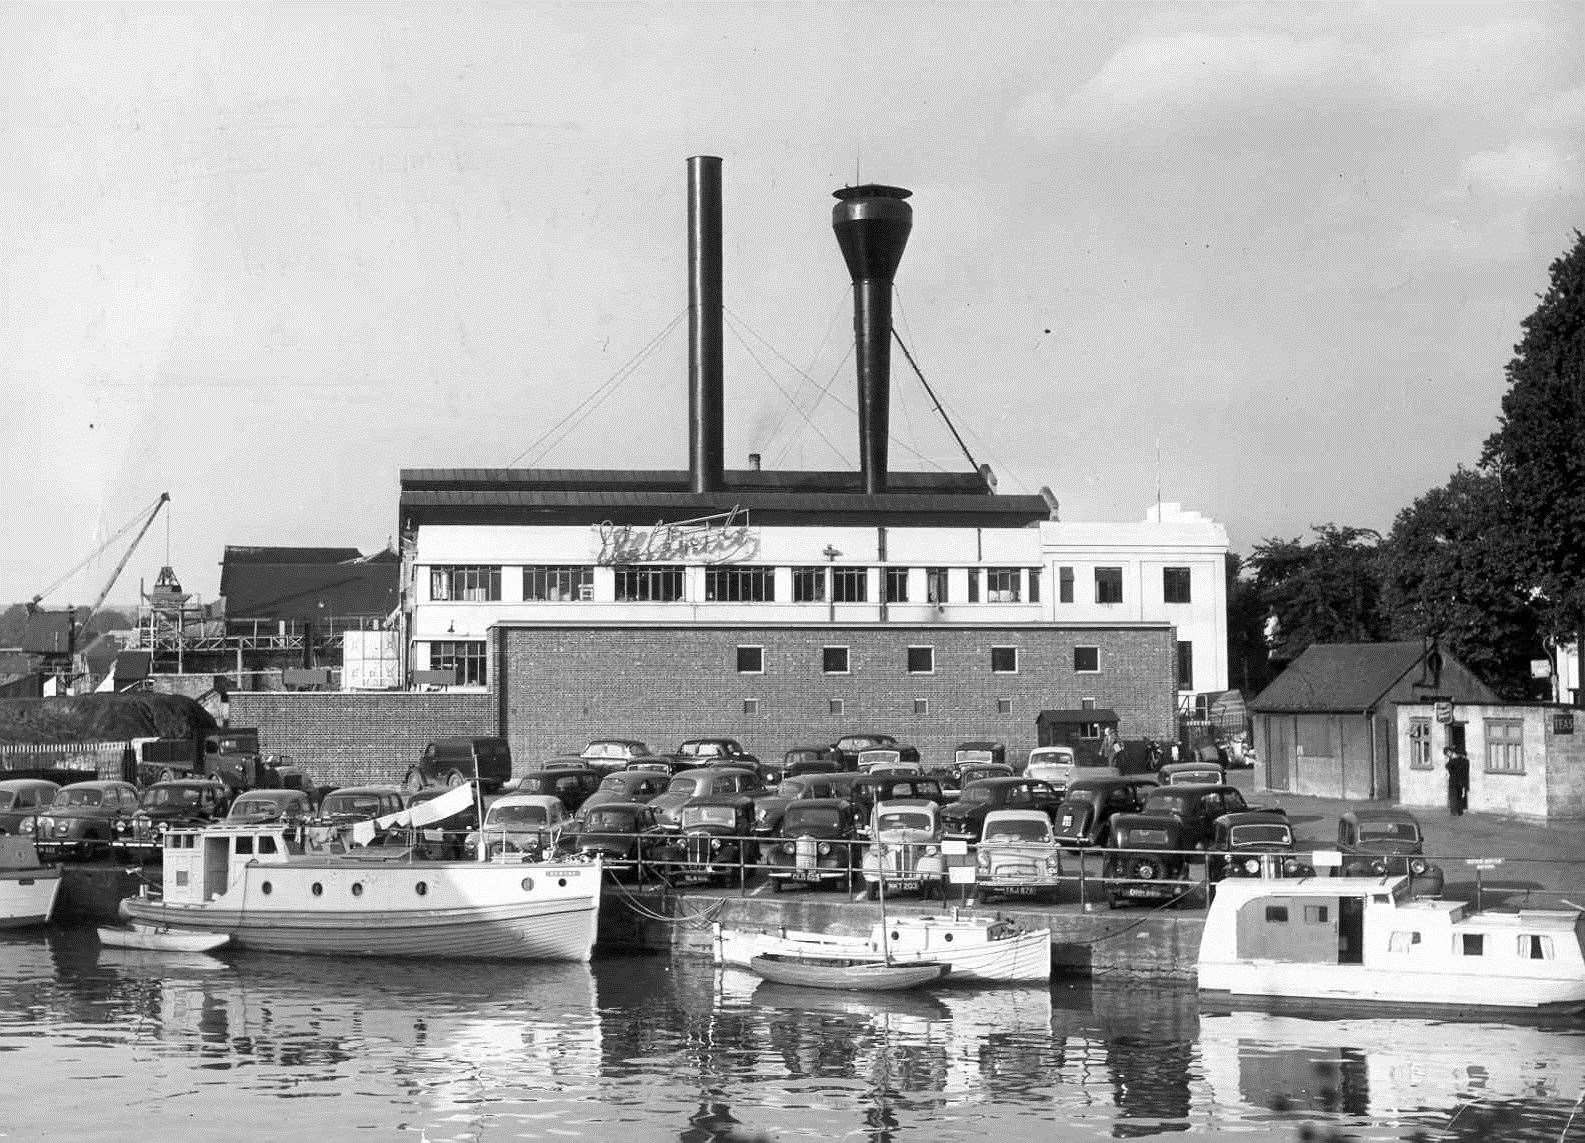 Maidstone Electricity Works in the 1950s, part of a heavily-industrialised area at Fairmeadow